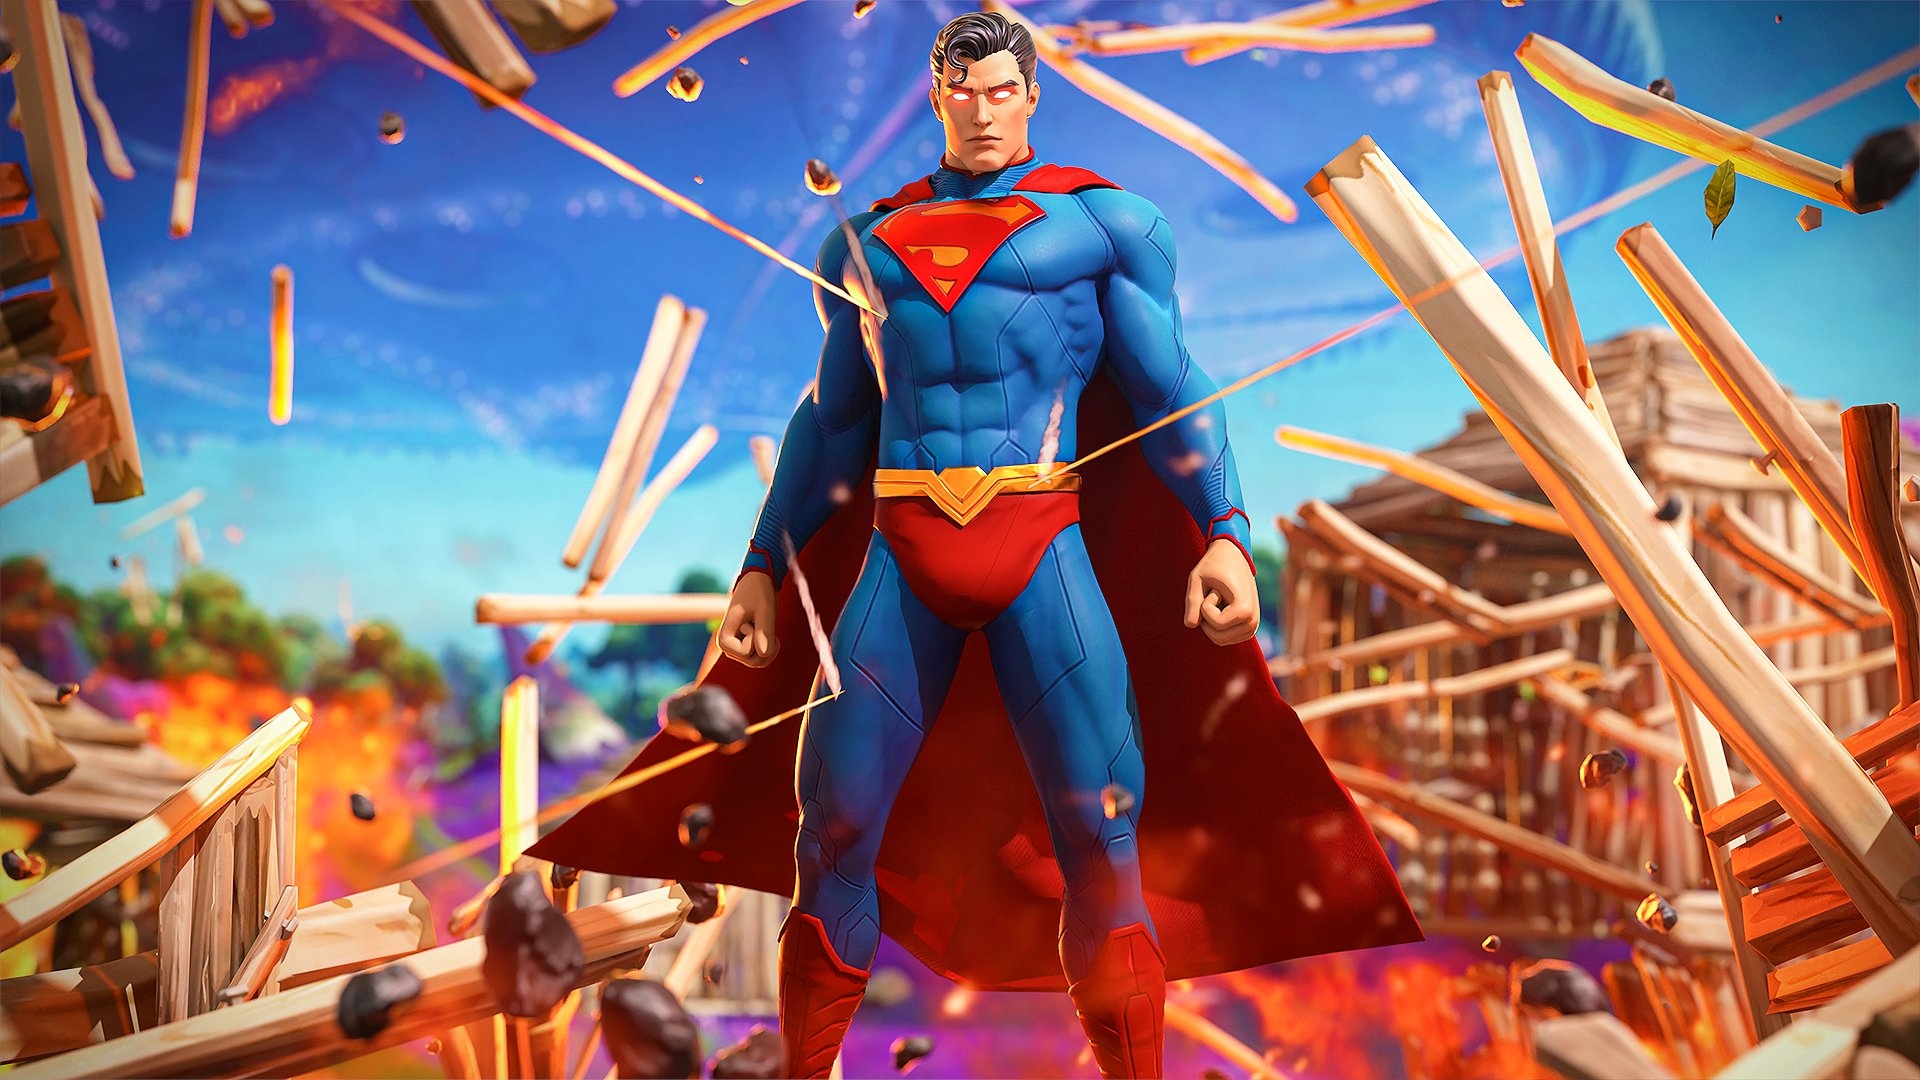 3840x21602021 Cool Superman Fortnite Epic 3840x21602021 Resolution Wallpaper,  HD Games 4K Wallpapers, Images, Photos and Background - Wallpapers Den